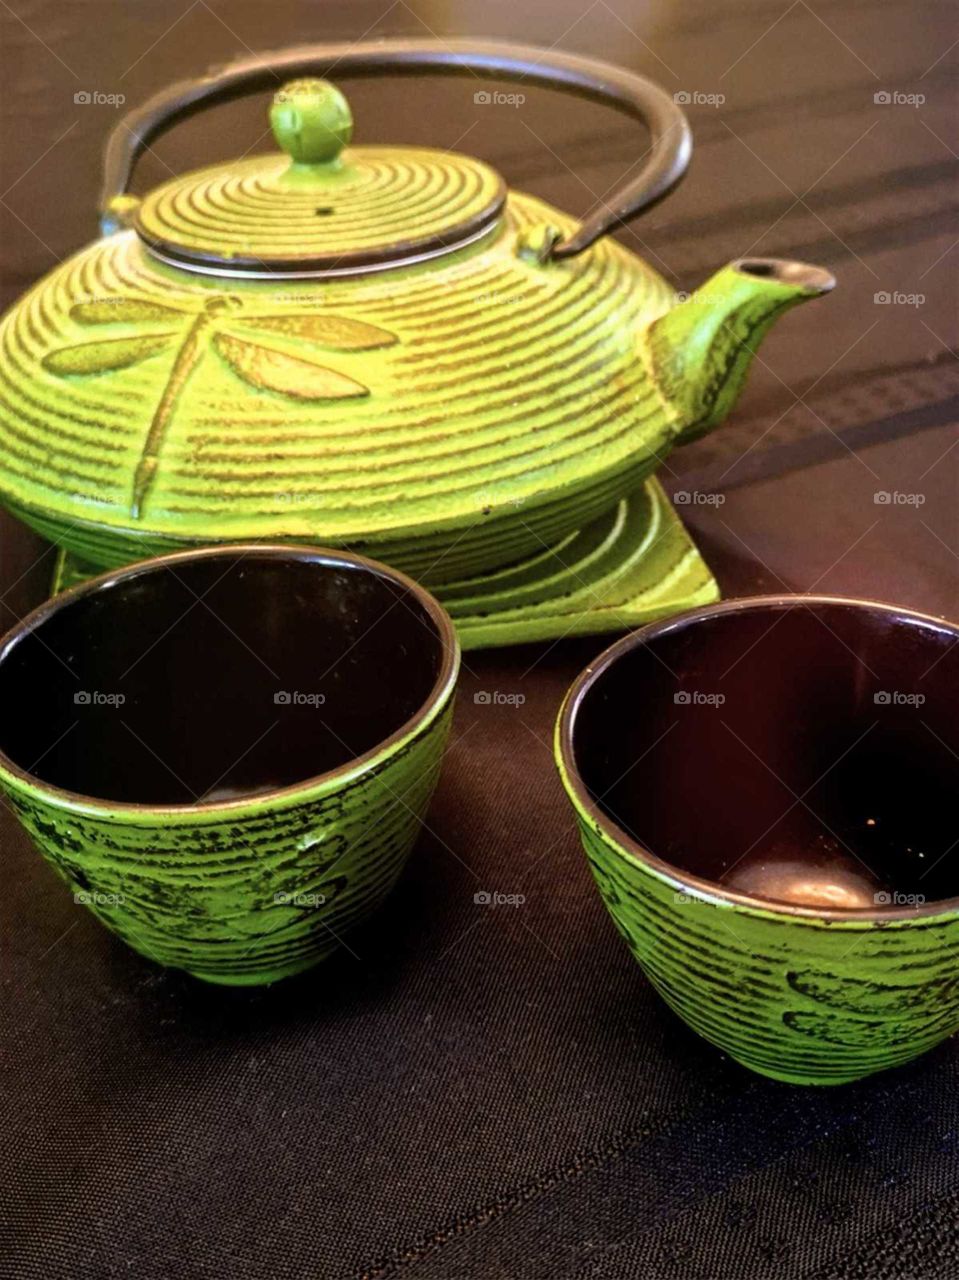 drinking japanese tea with a green teapot